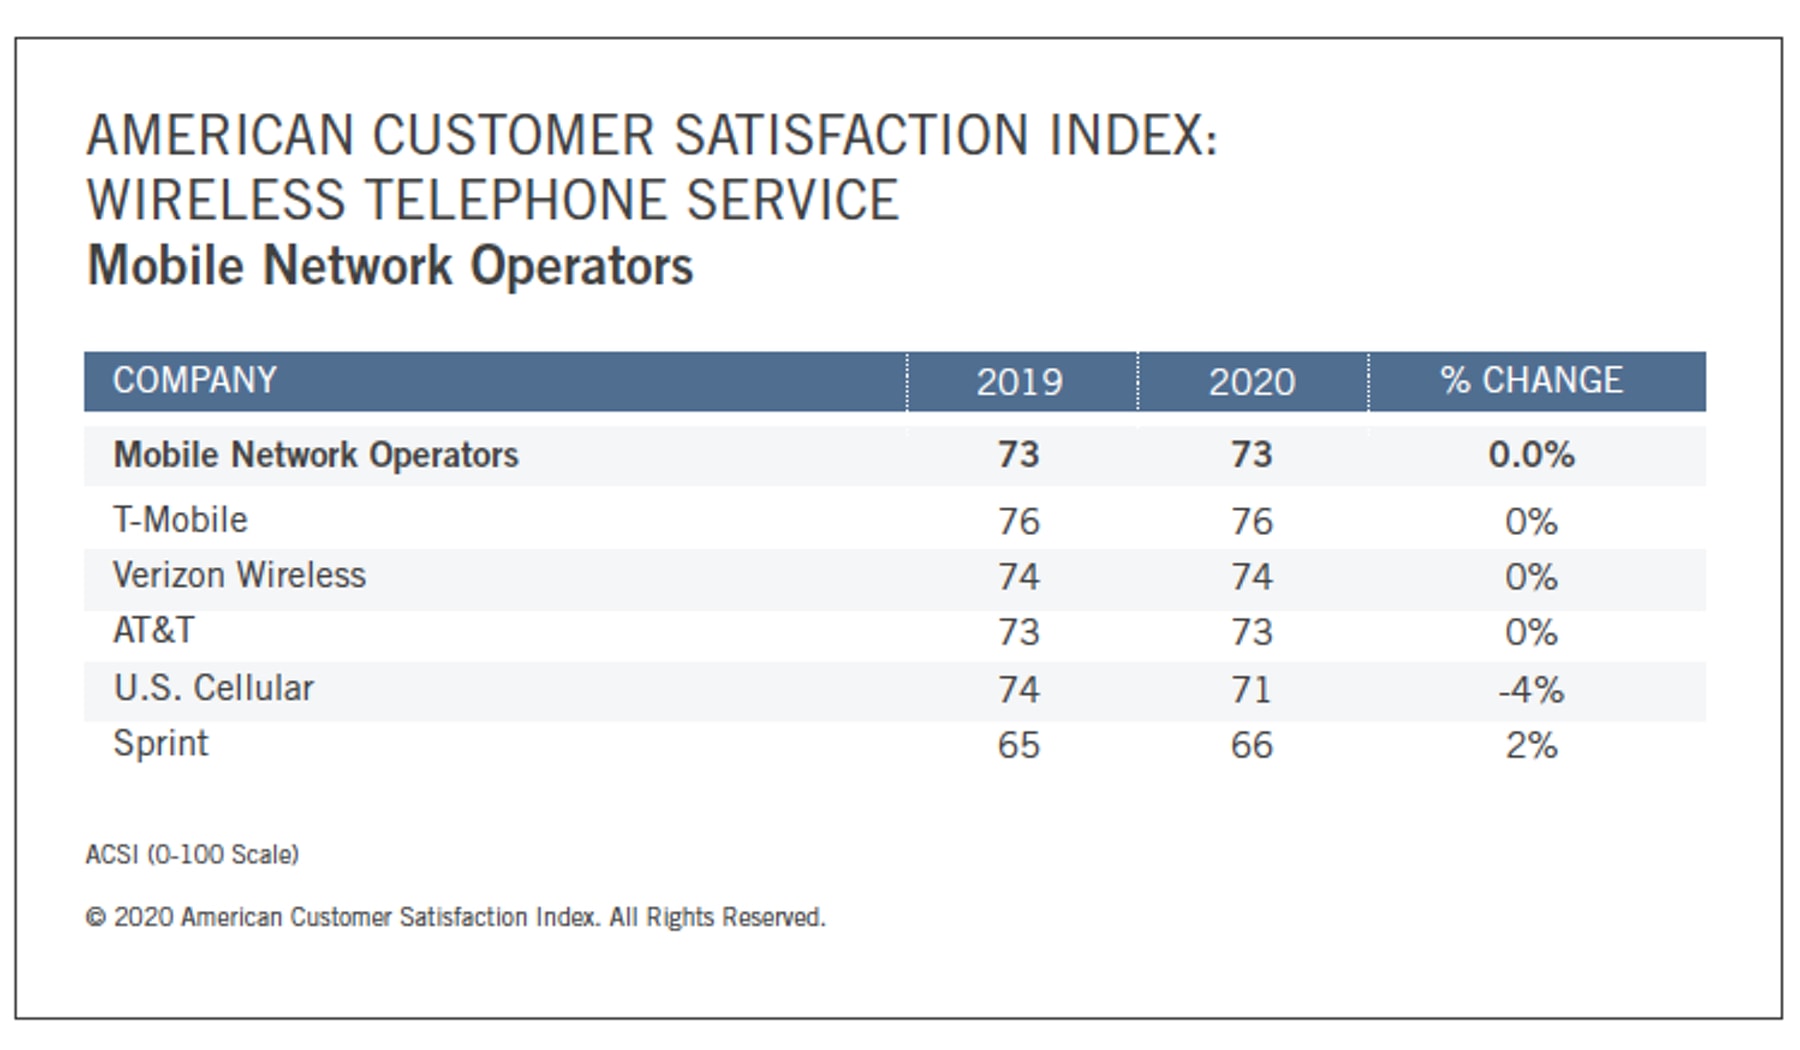 T-Mobile continues to dominate among consumers as the No. 1 mobile carrier in the U.S.